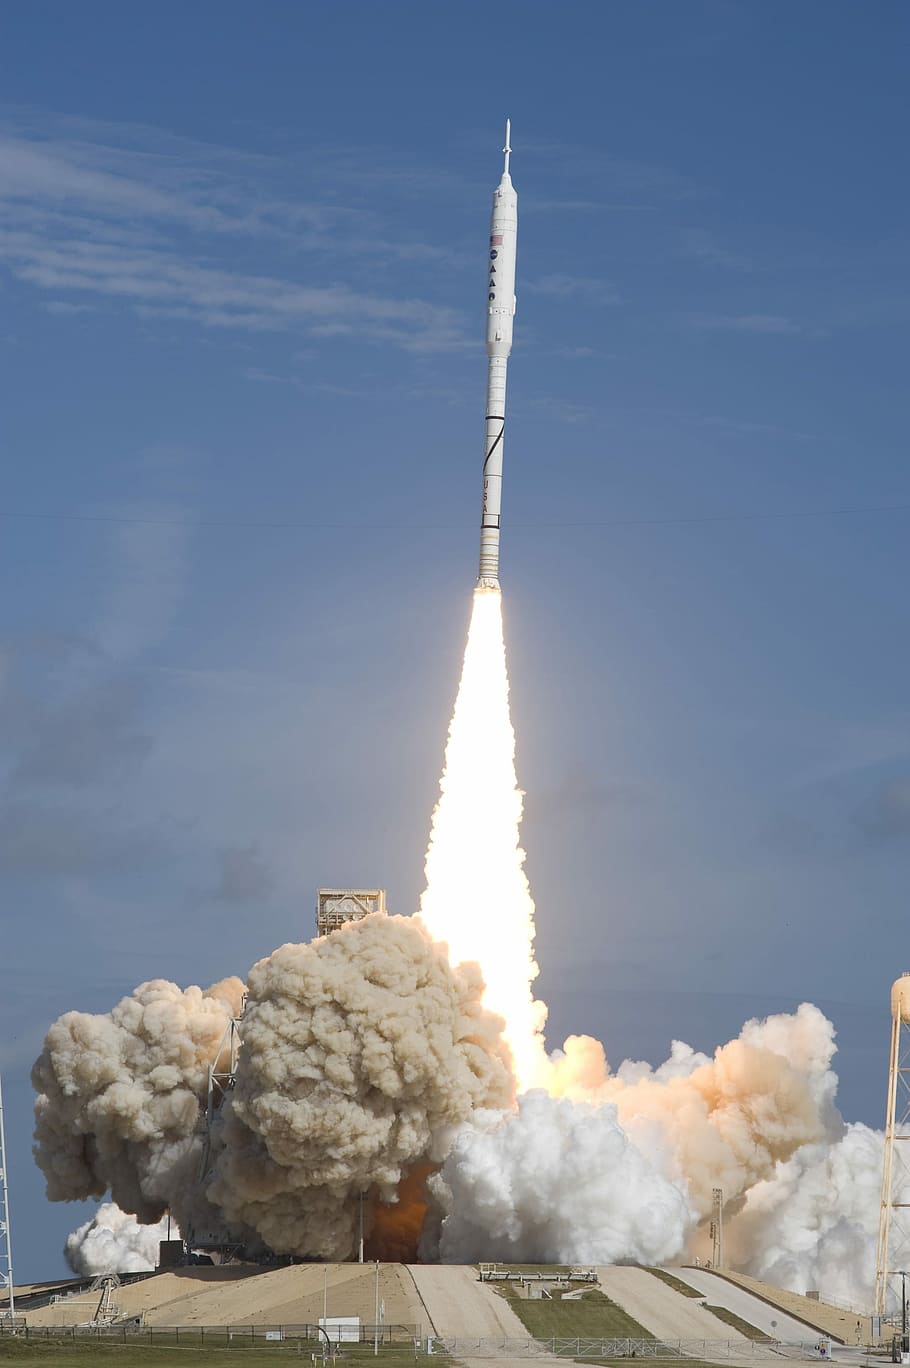 launching missile, Rocket Launch, Ares I X, rocket, cape canaveral, fire tail, nozzle, start, take off, speed up